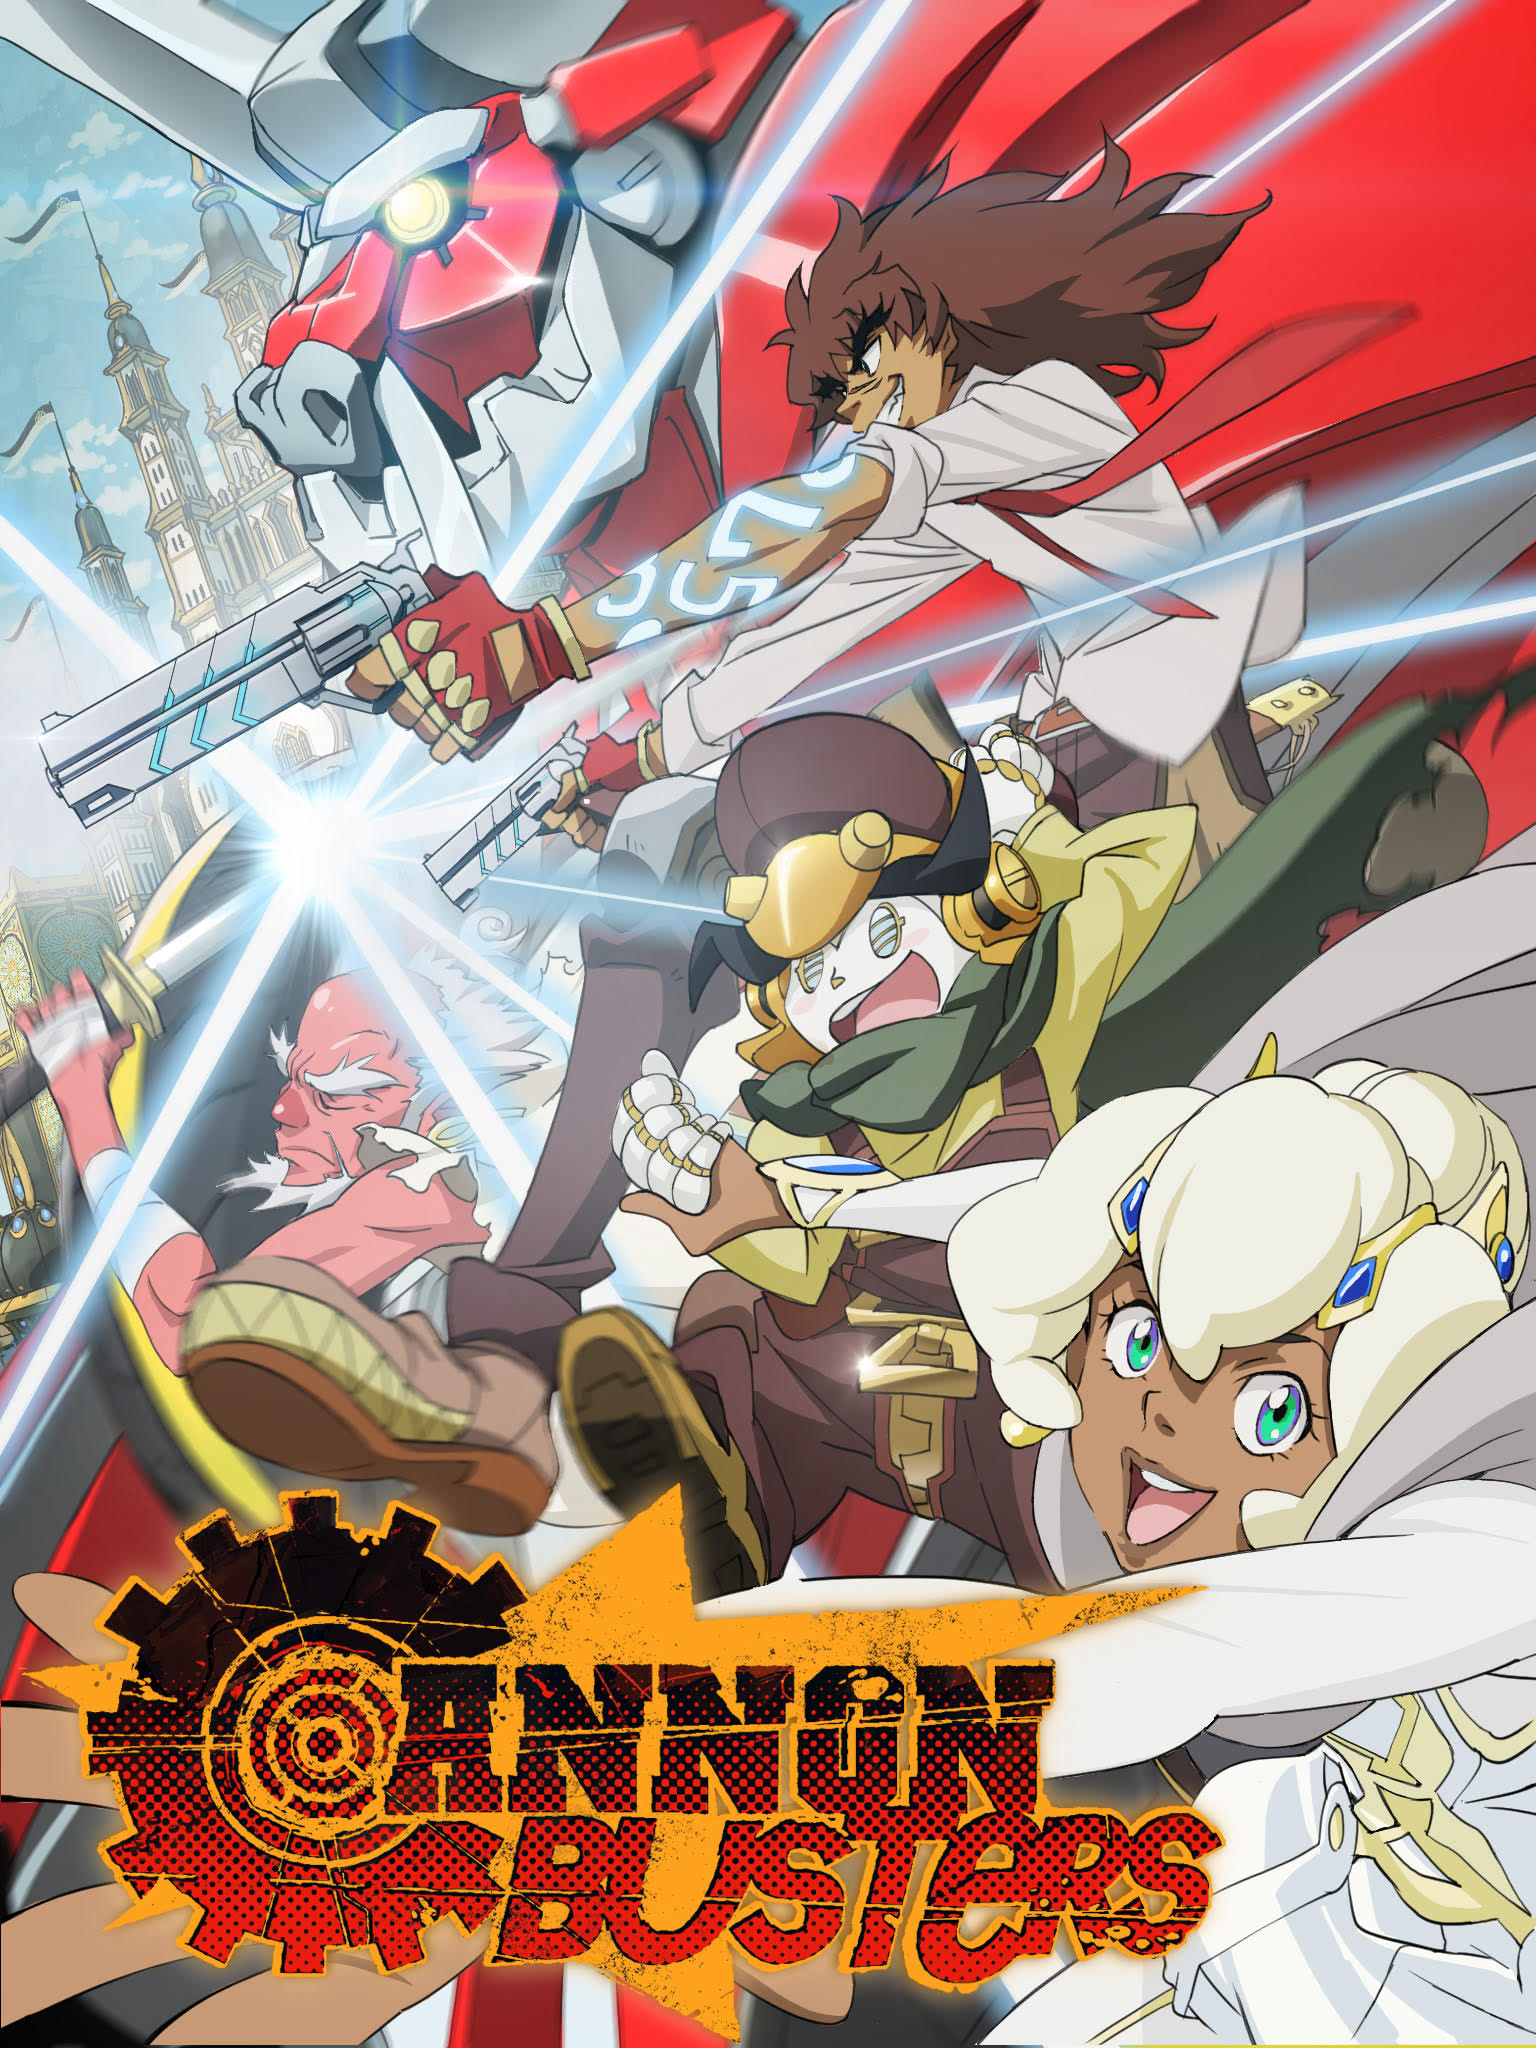 Poster Phim Cannon Busters: Khắc tinh đại pháo (Cannon Busters)